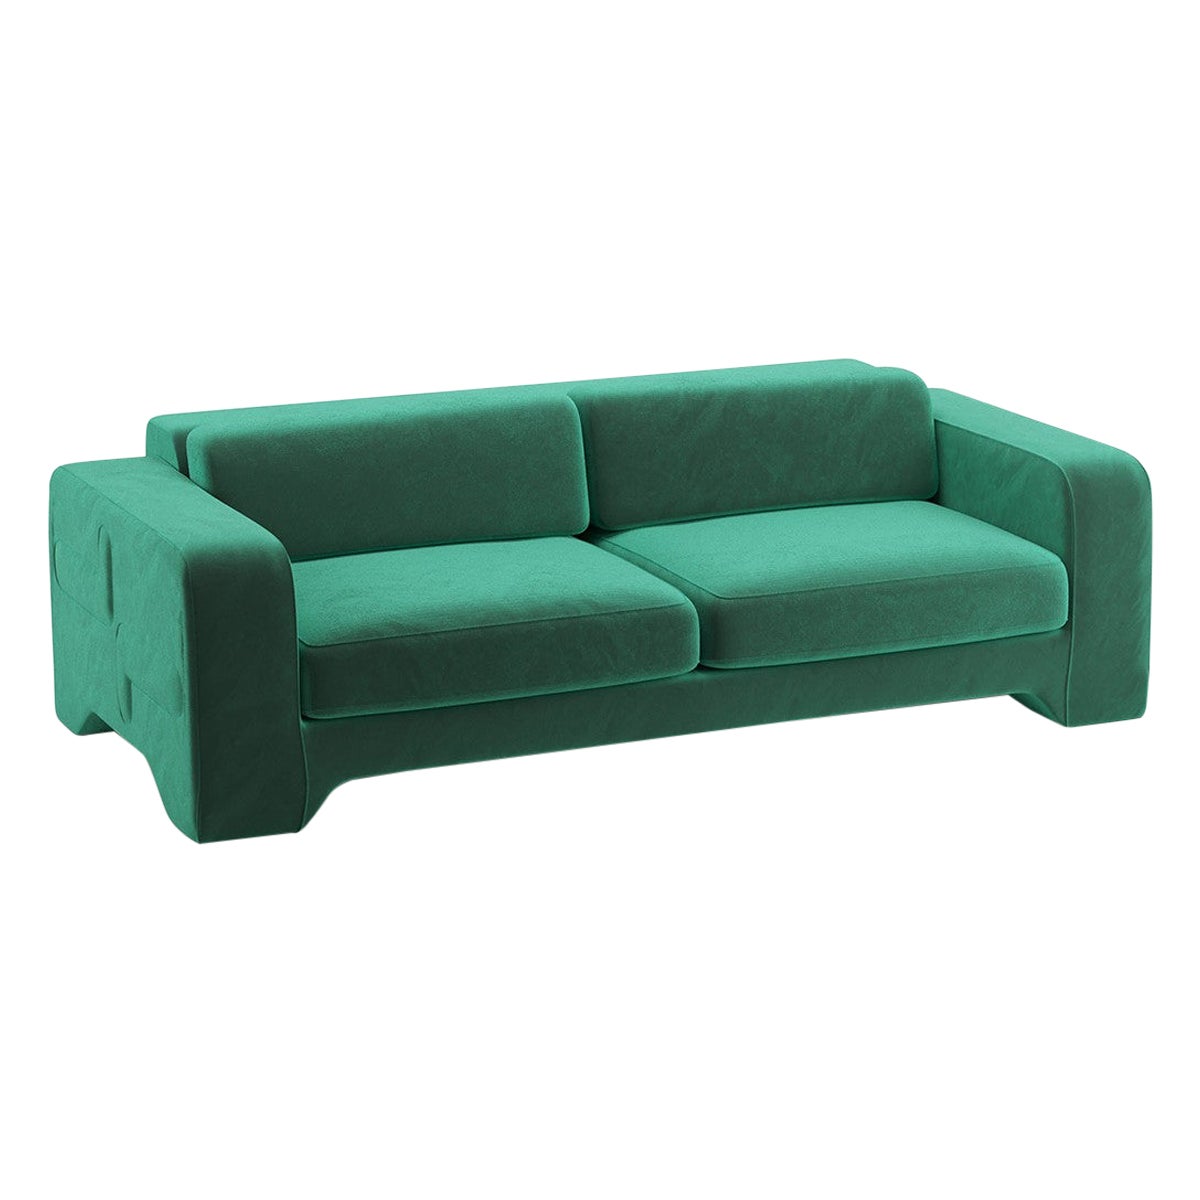 Popus Editions Giovanna 2.5 Seater Sofa in Green '772256' Como Velvet Upholstery For Sale